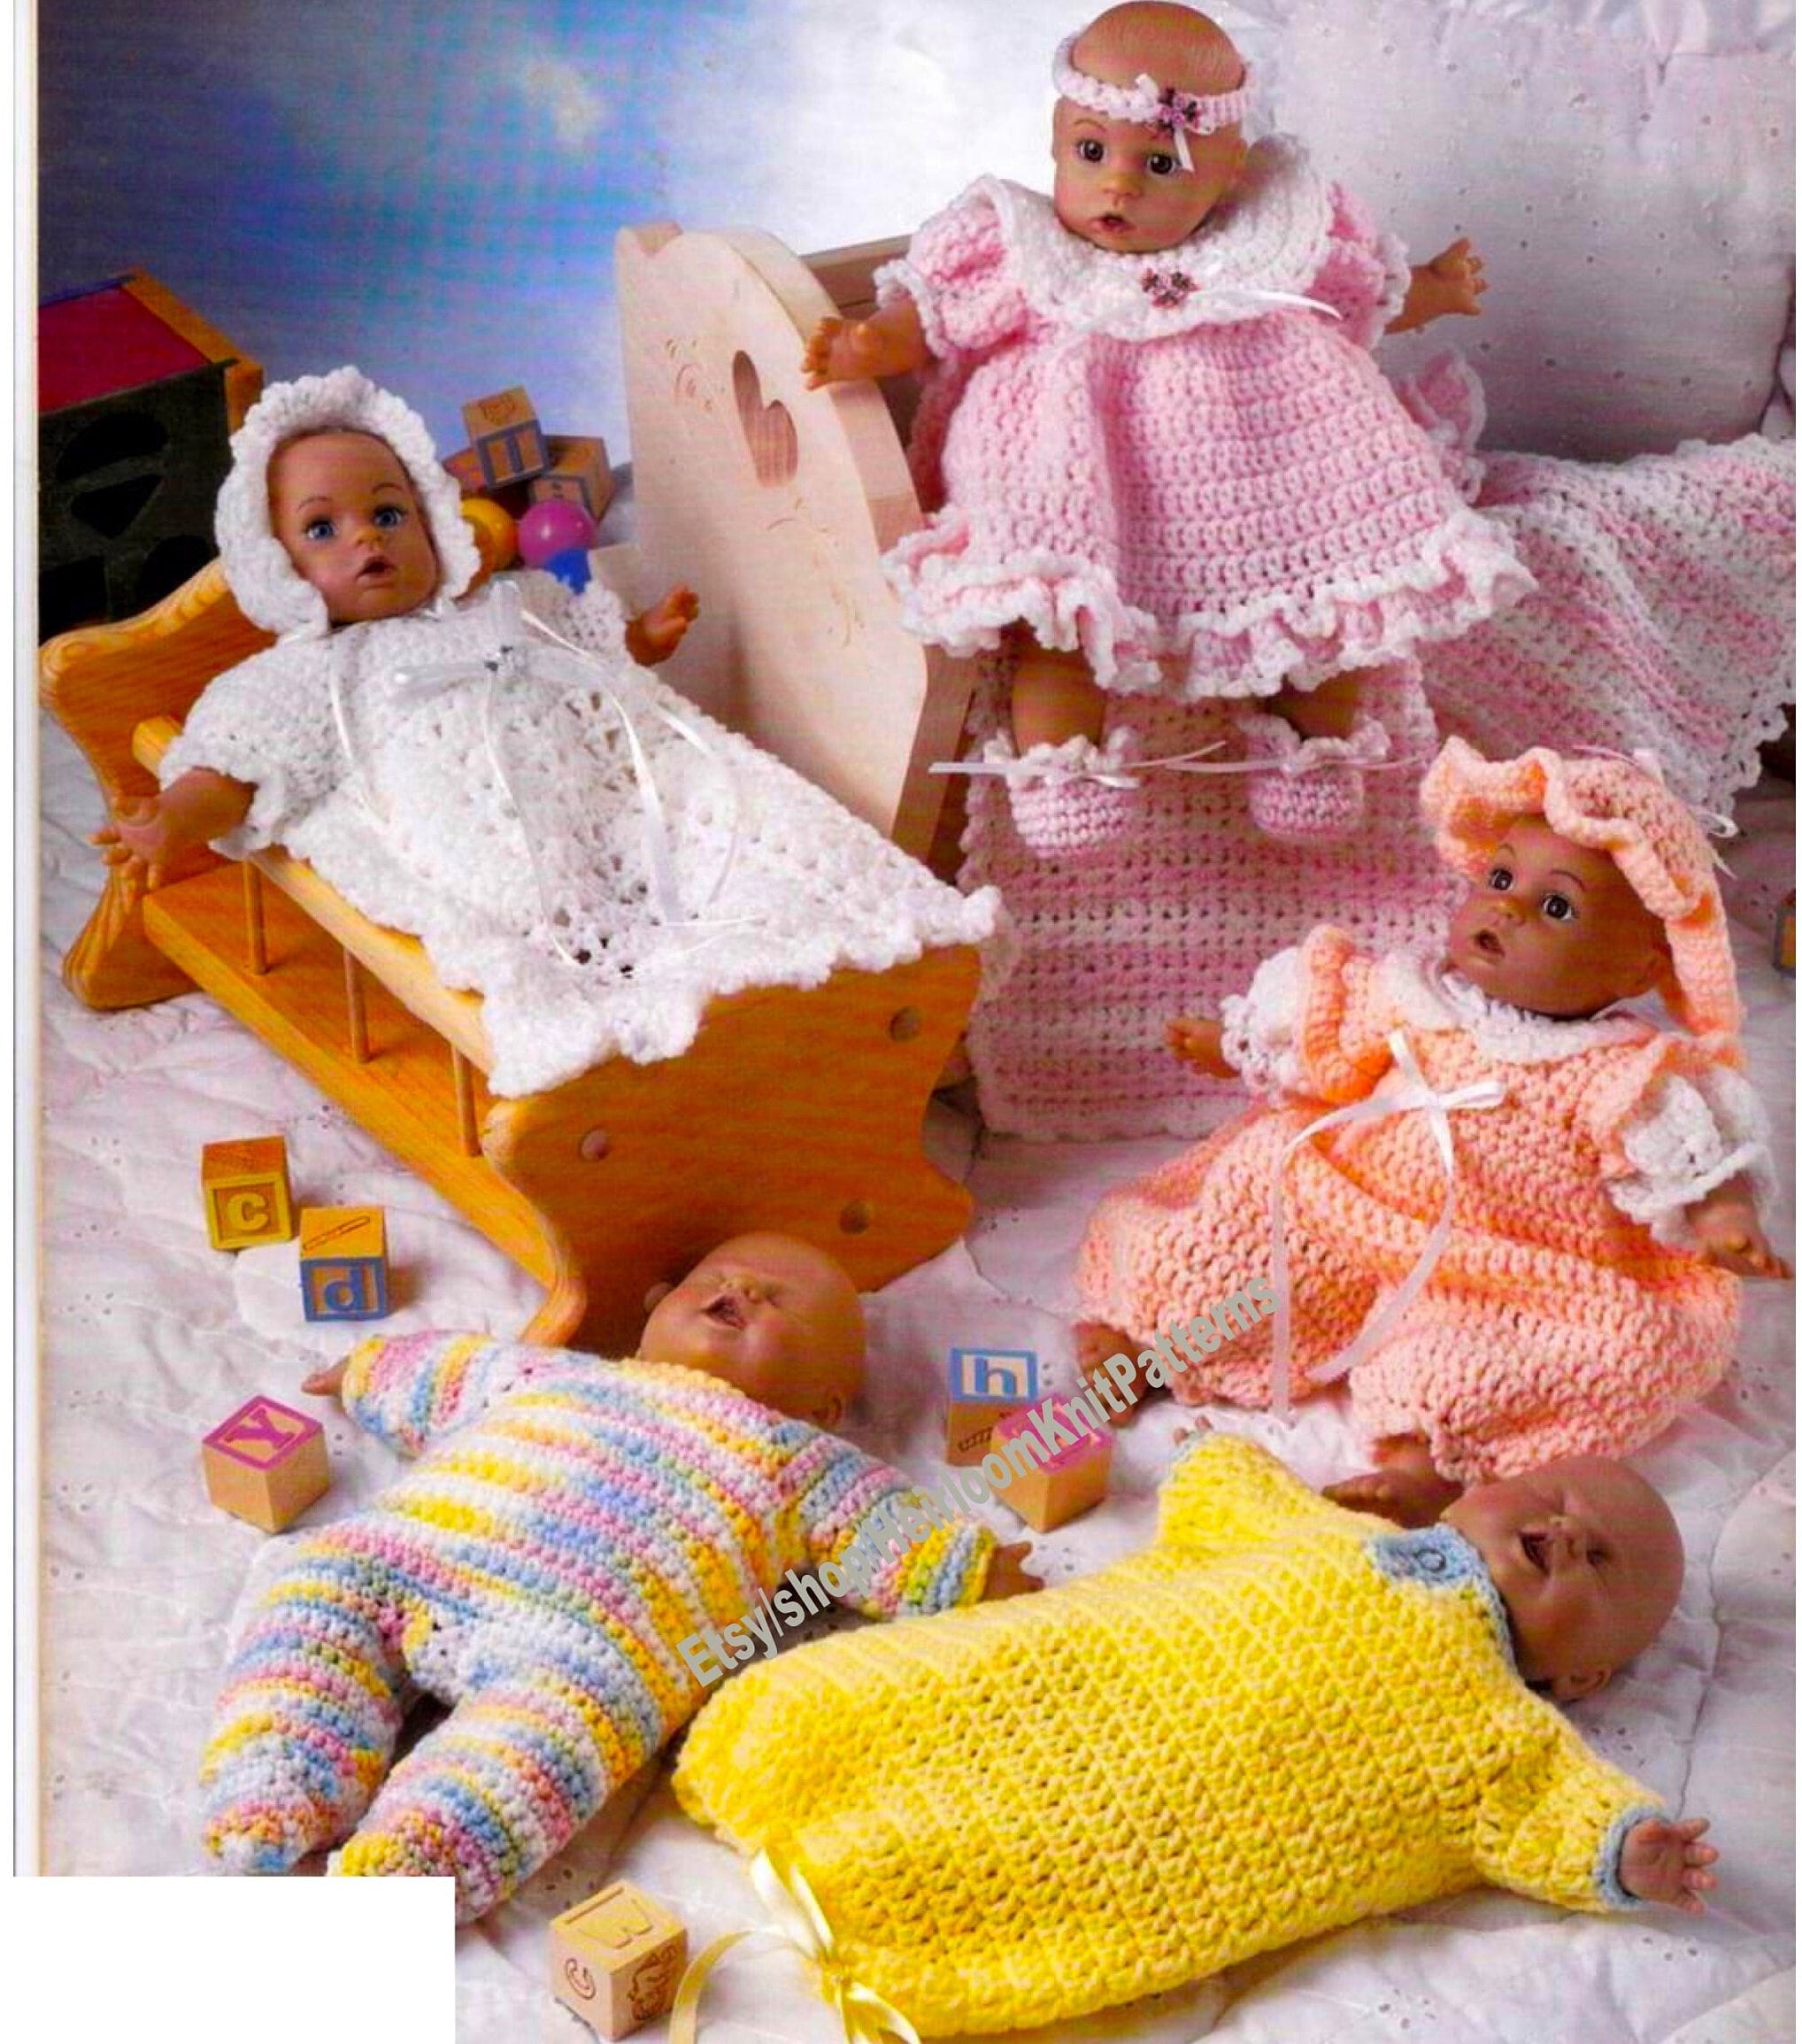 Soft Love Little Honey 14 Doll and Layette Accessories in Originial Box